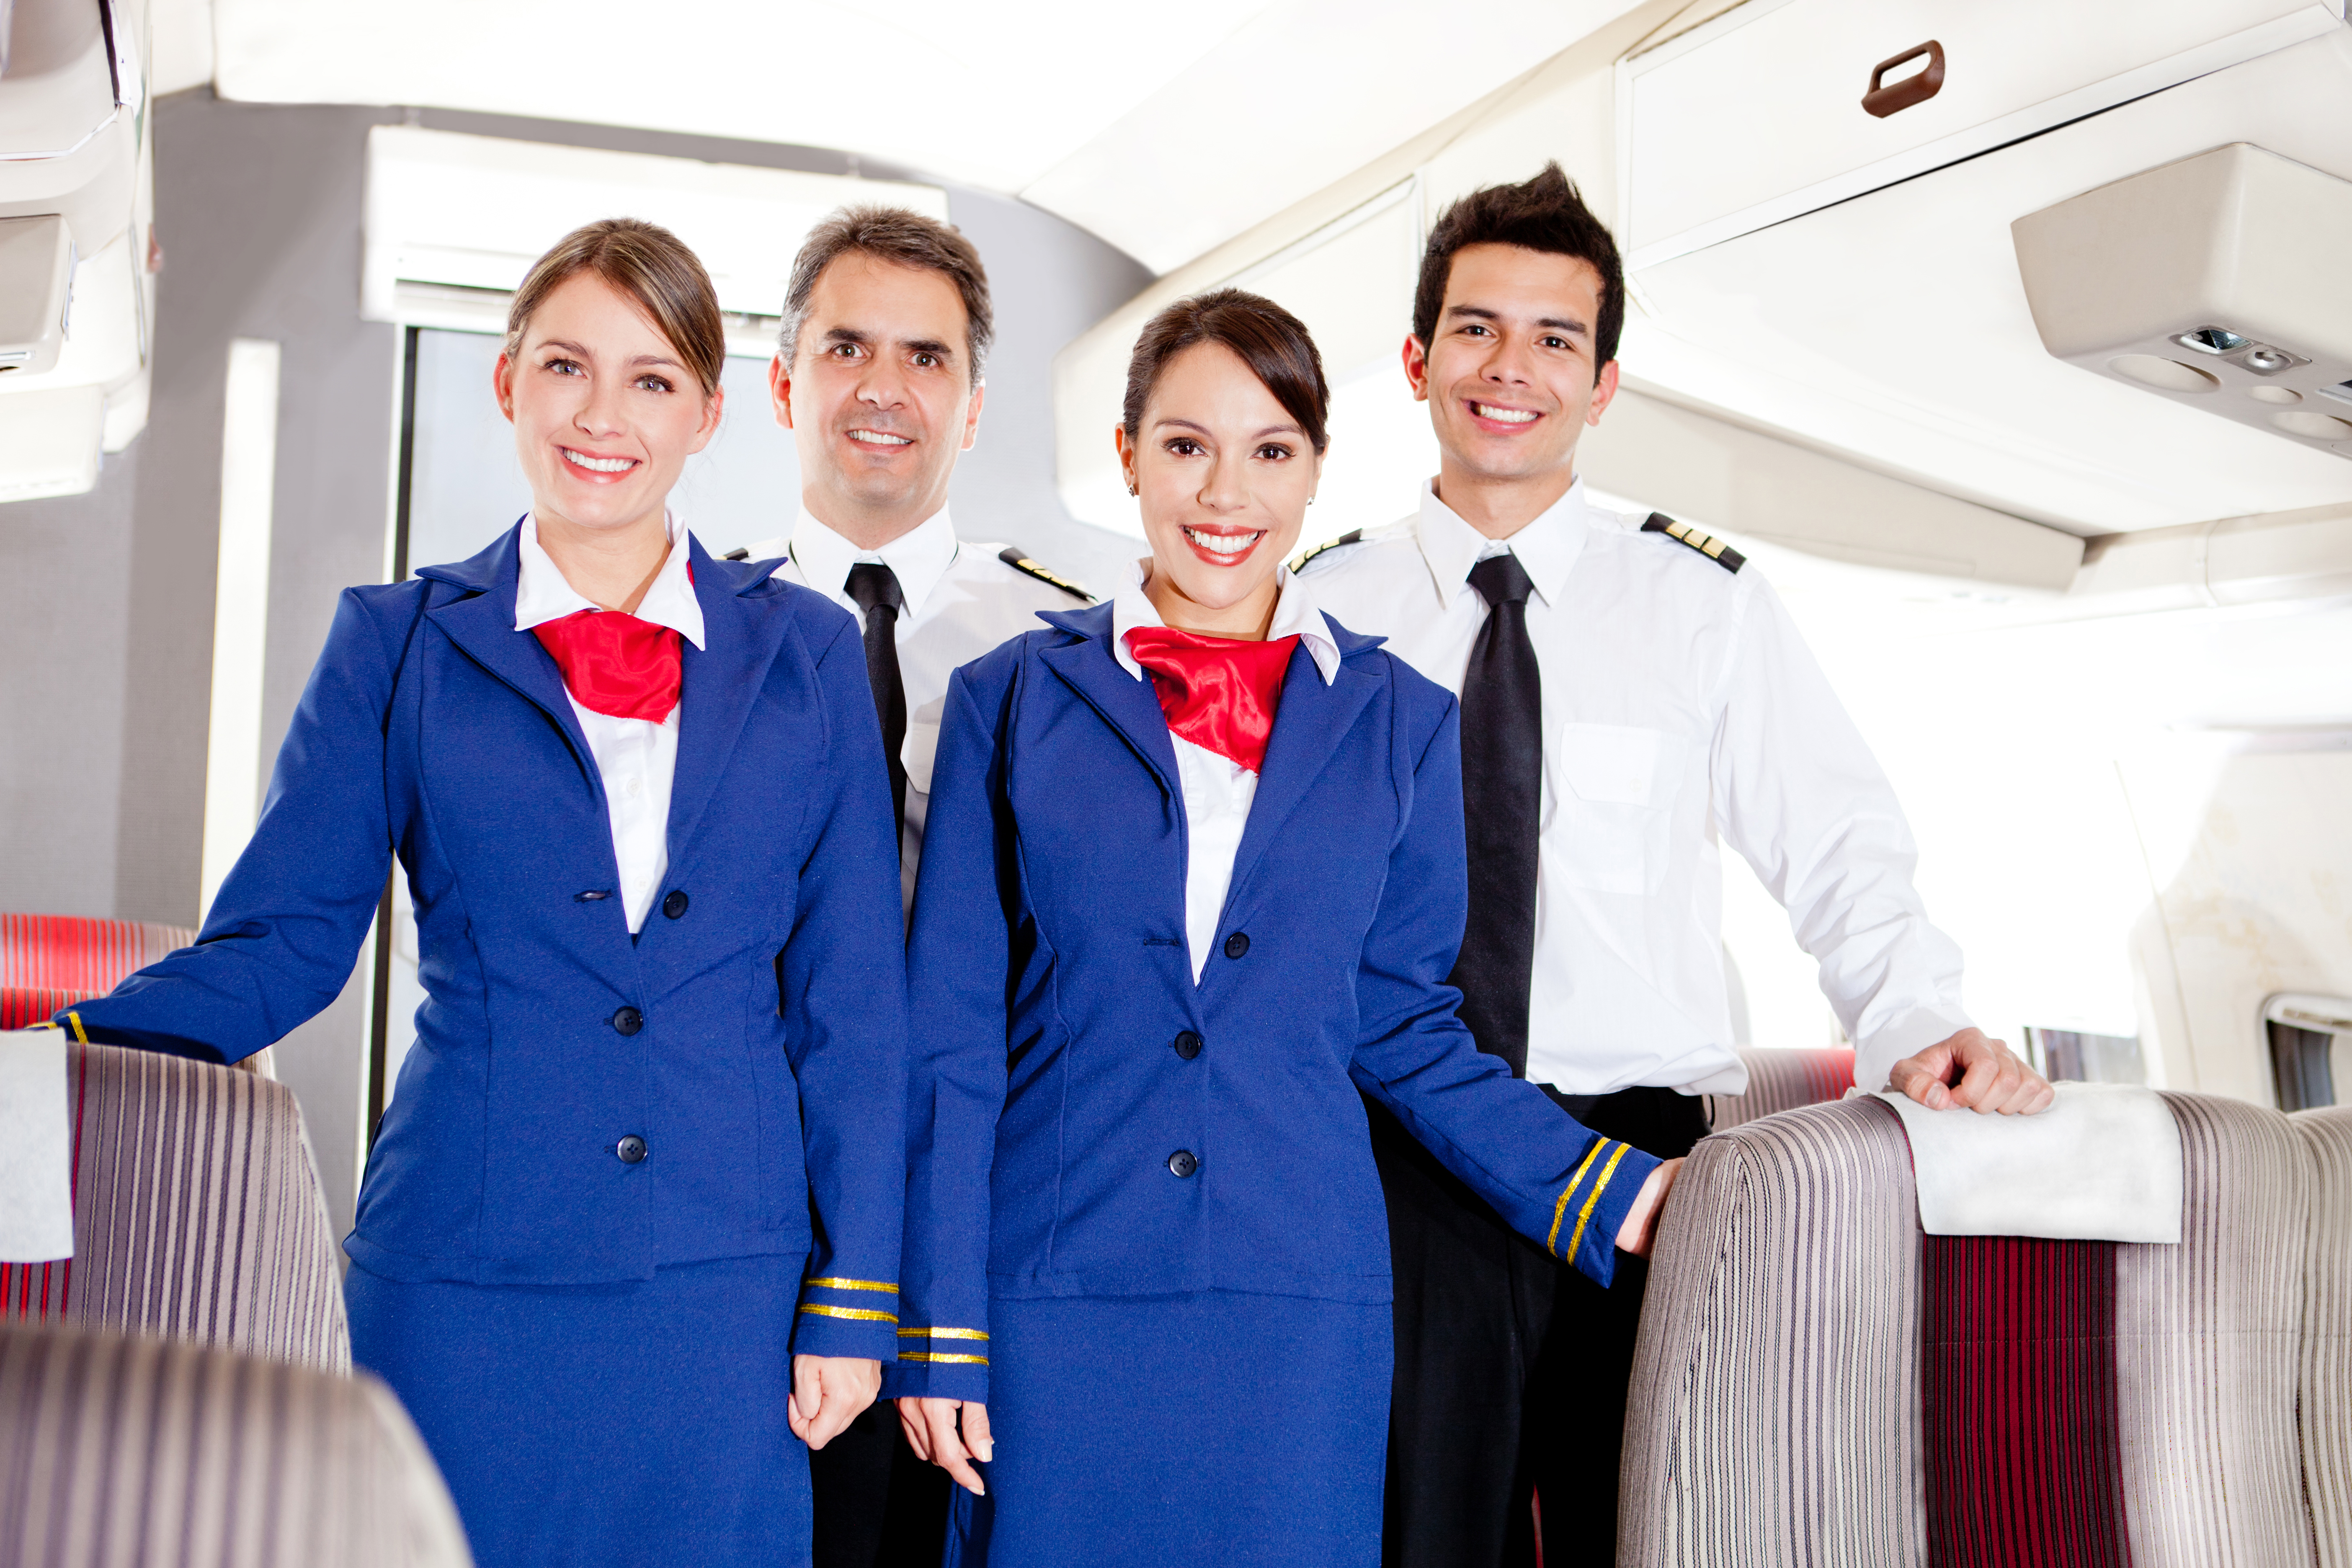 Friendly cabin crew in an airplane smiling